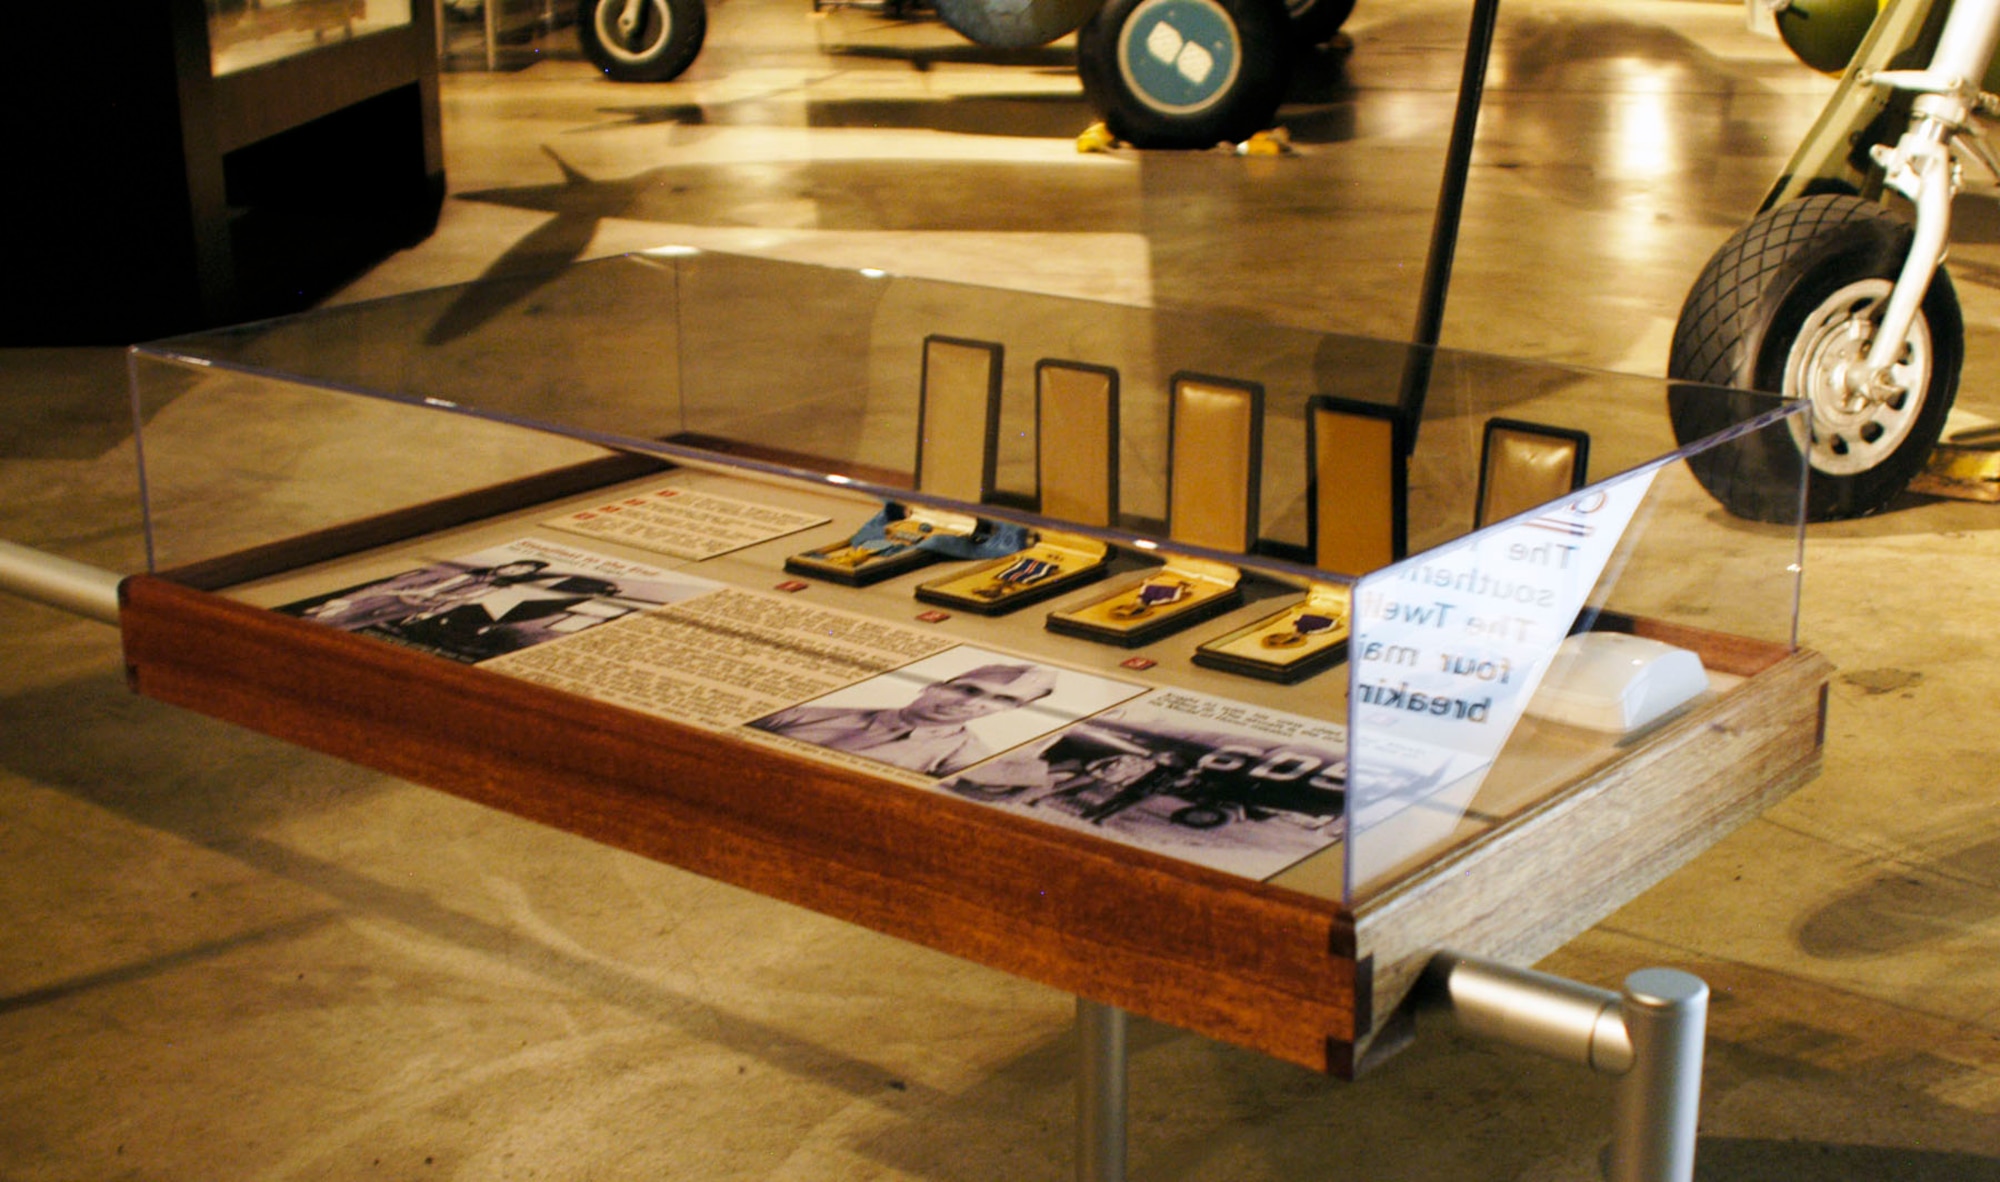 DAYTON, Ohio -- 1st Lt. Raymond L. Knight exhibit in the World War II Gallery at the National Museum of the U.S. Air Force. (U.S. Air Force photo)